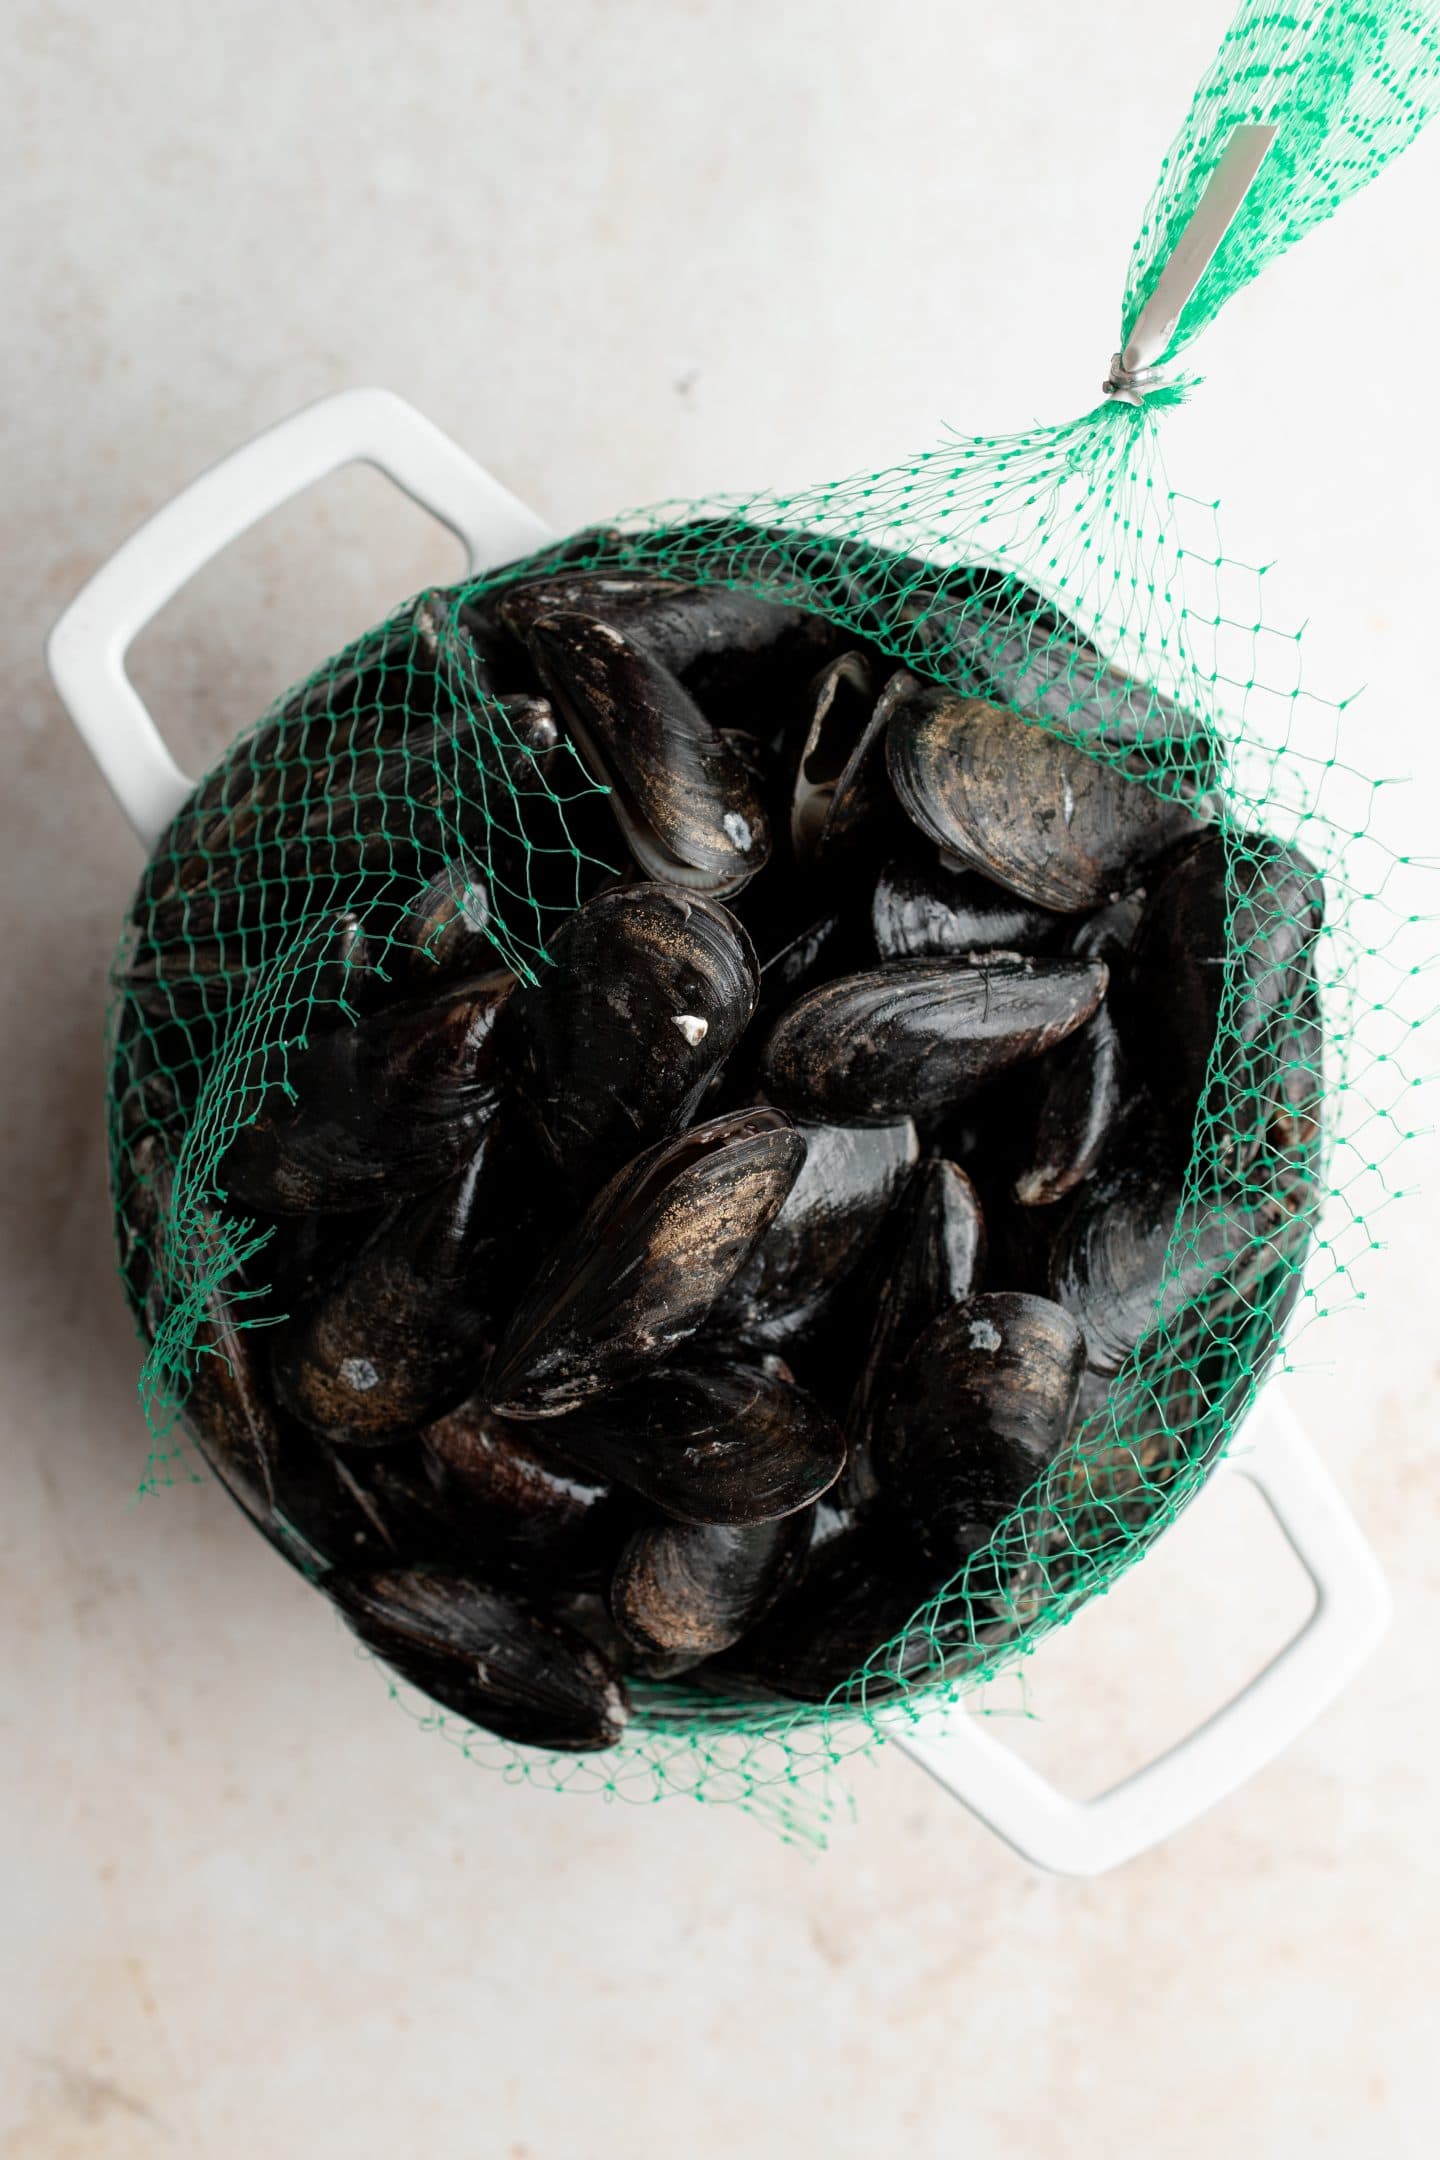 bag of mussels